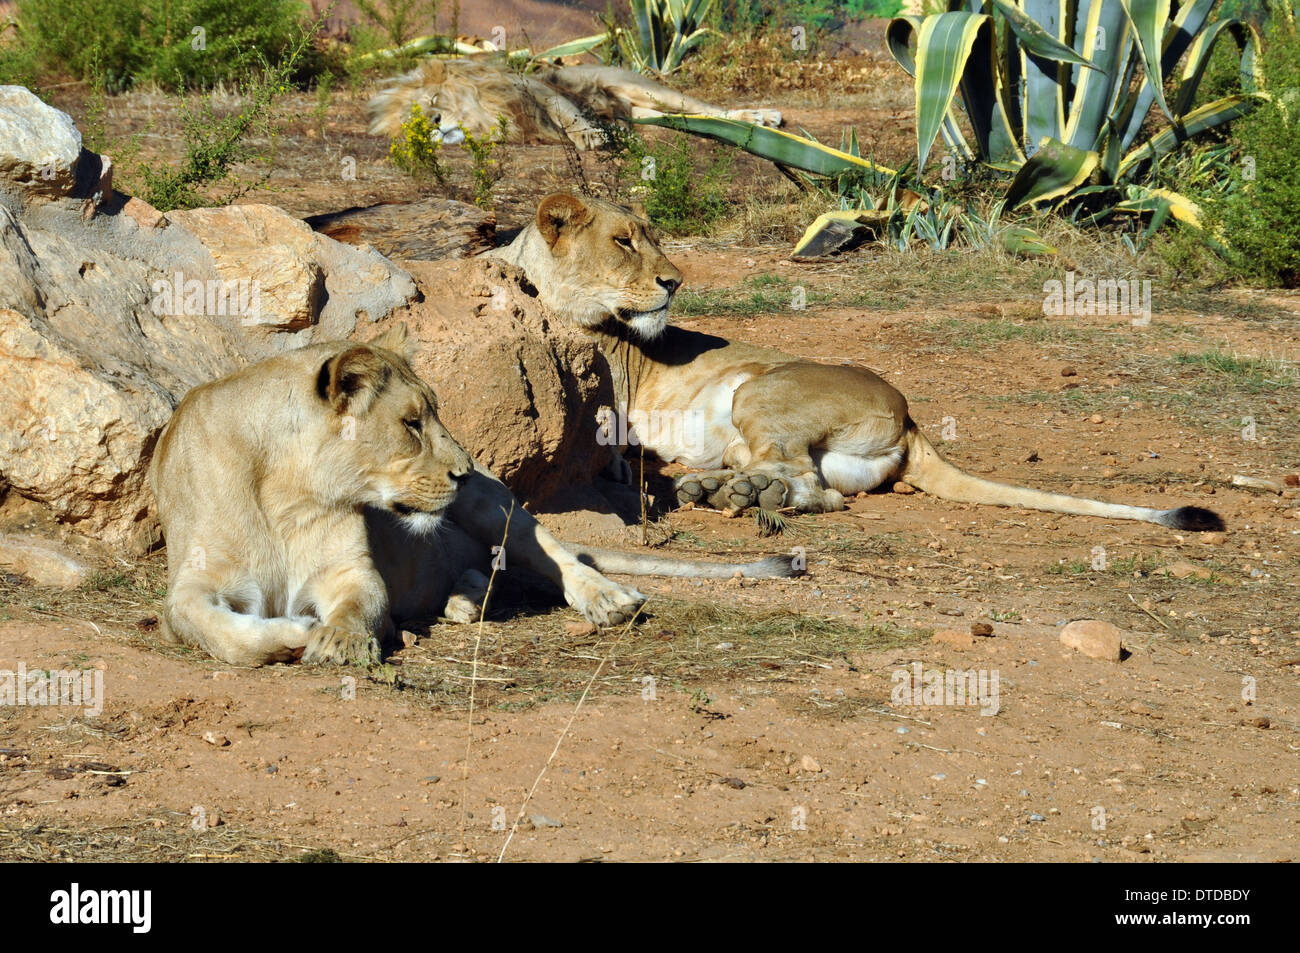 Two lionesses resting. Southwest African lions wild animals. Stock Photo